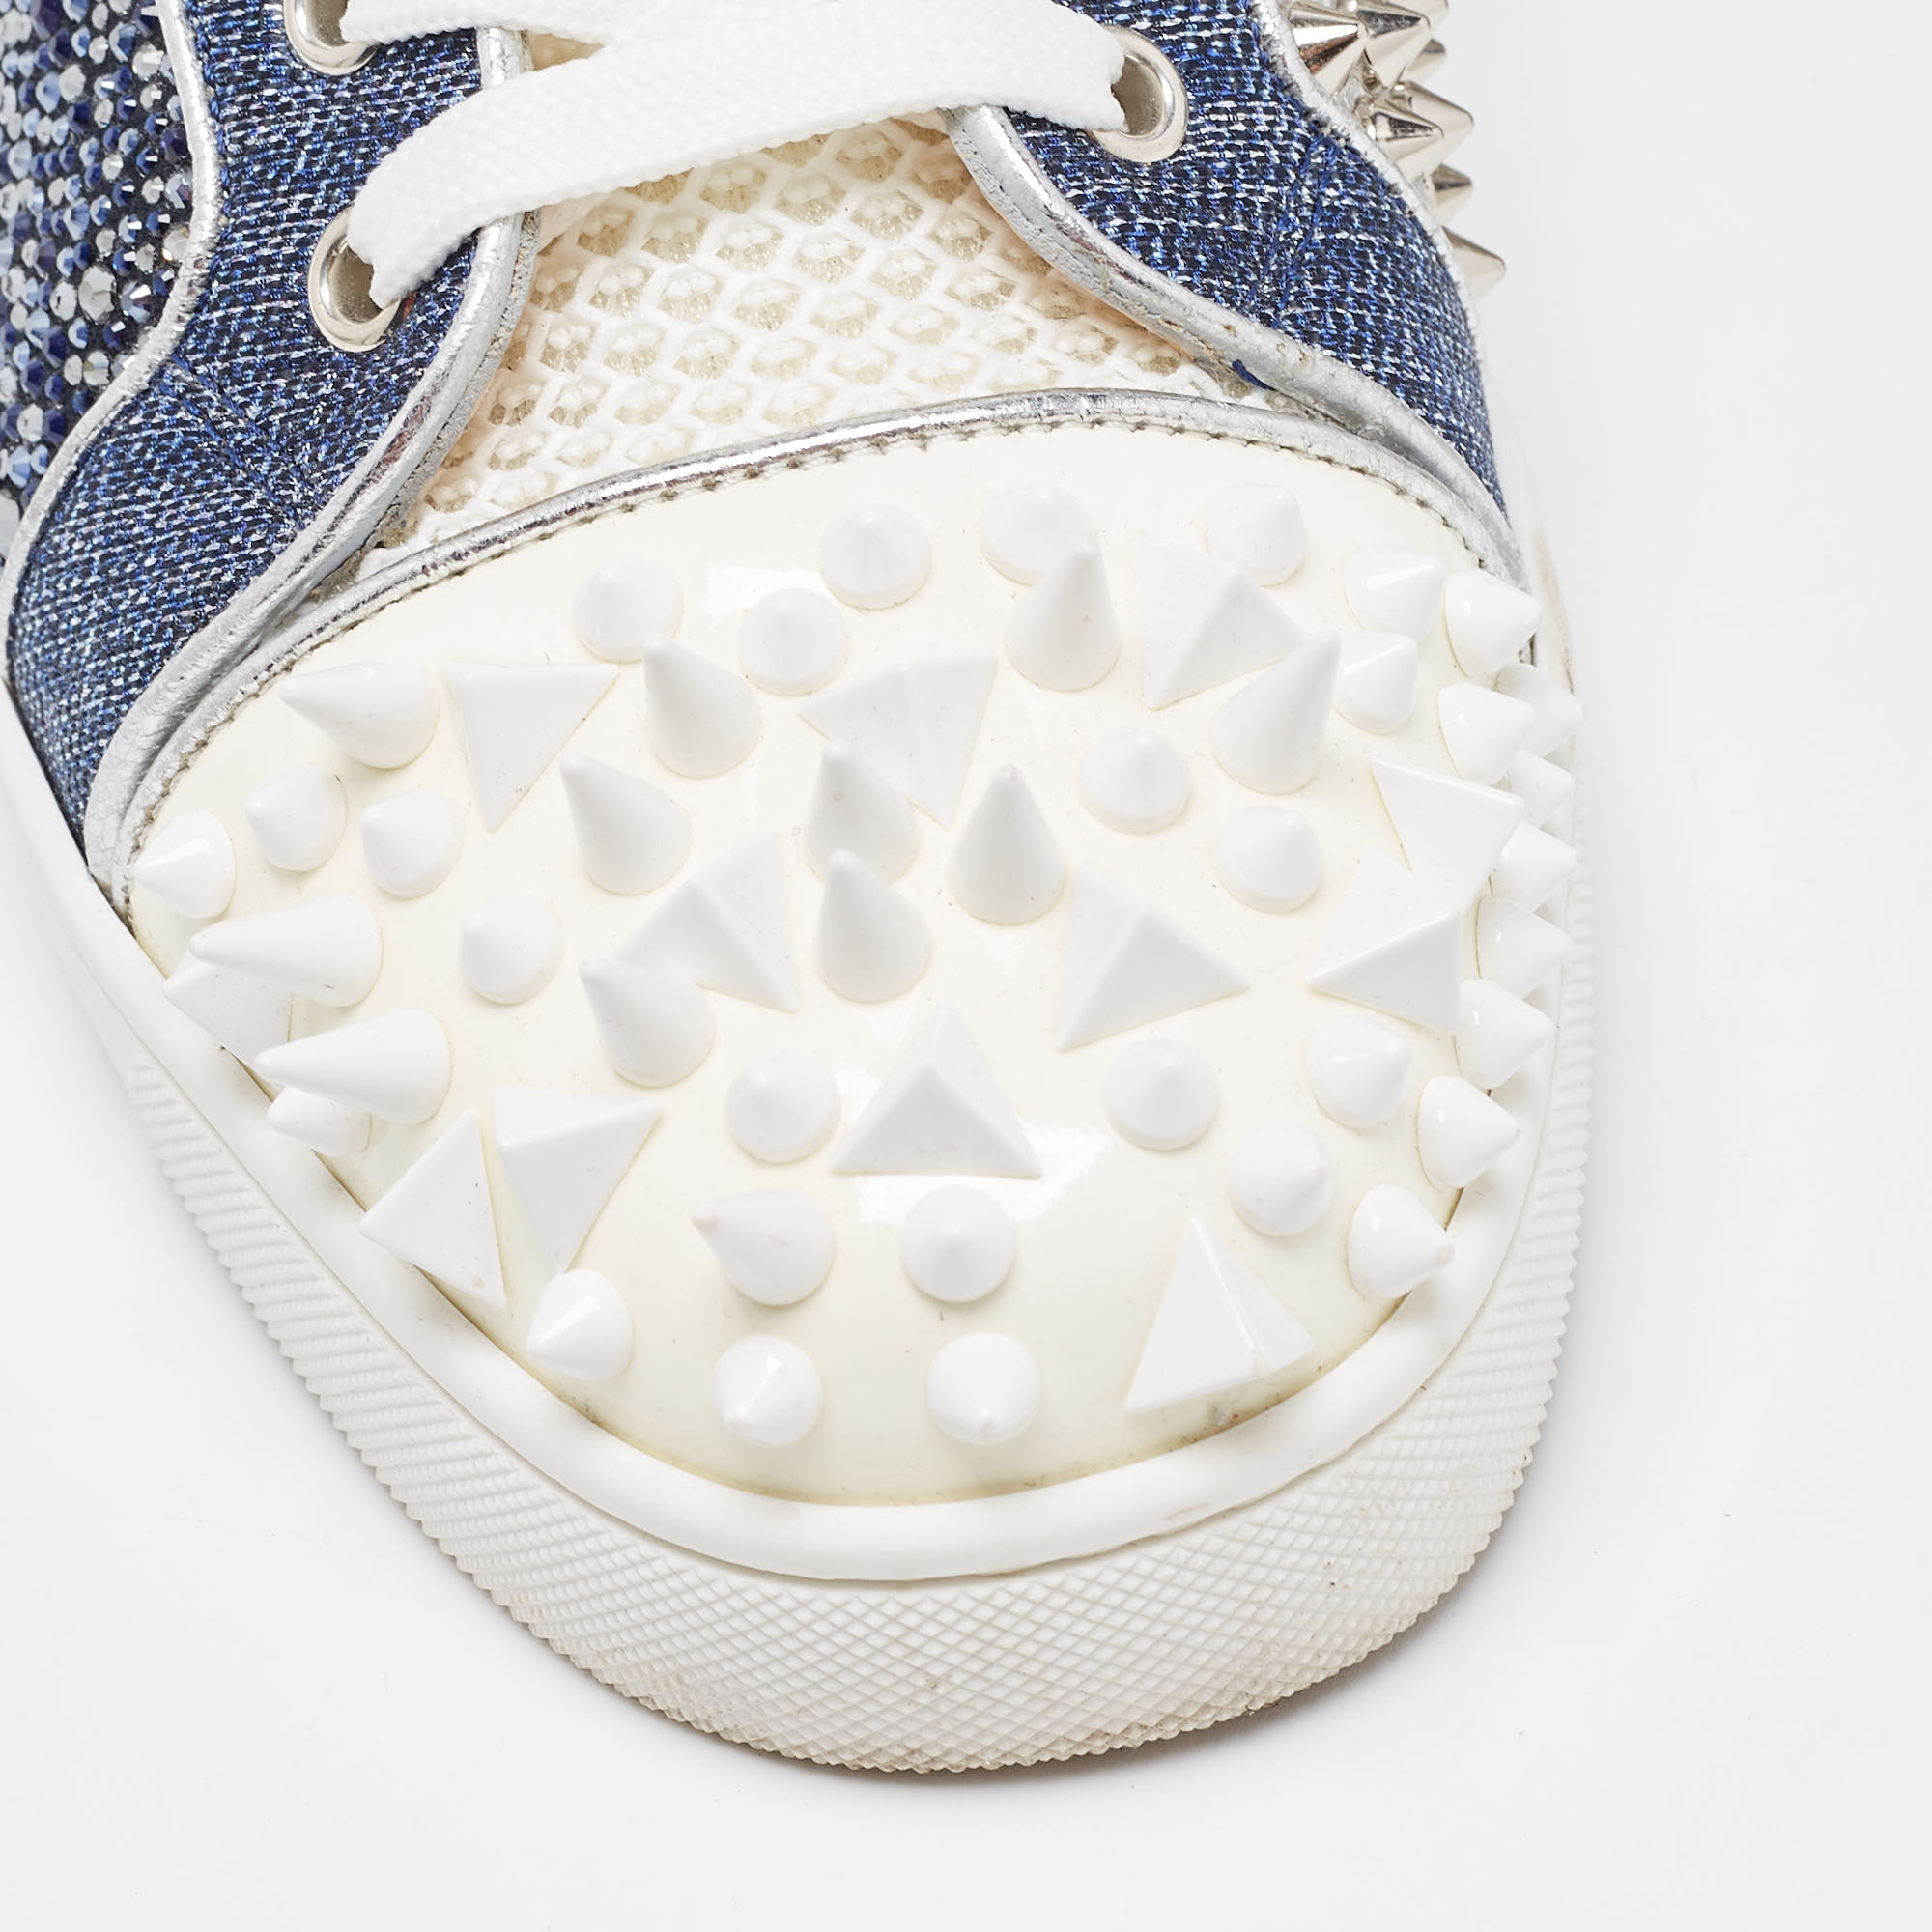 Christian Louboutin Blue/Silver Denim And Patent Lou Degra Spikes Studded Hi High Top Sneakers Size 39